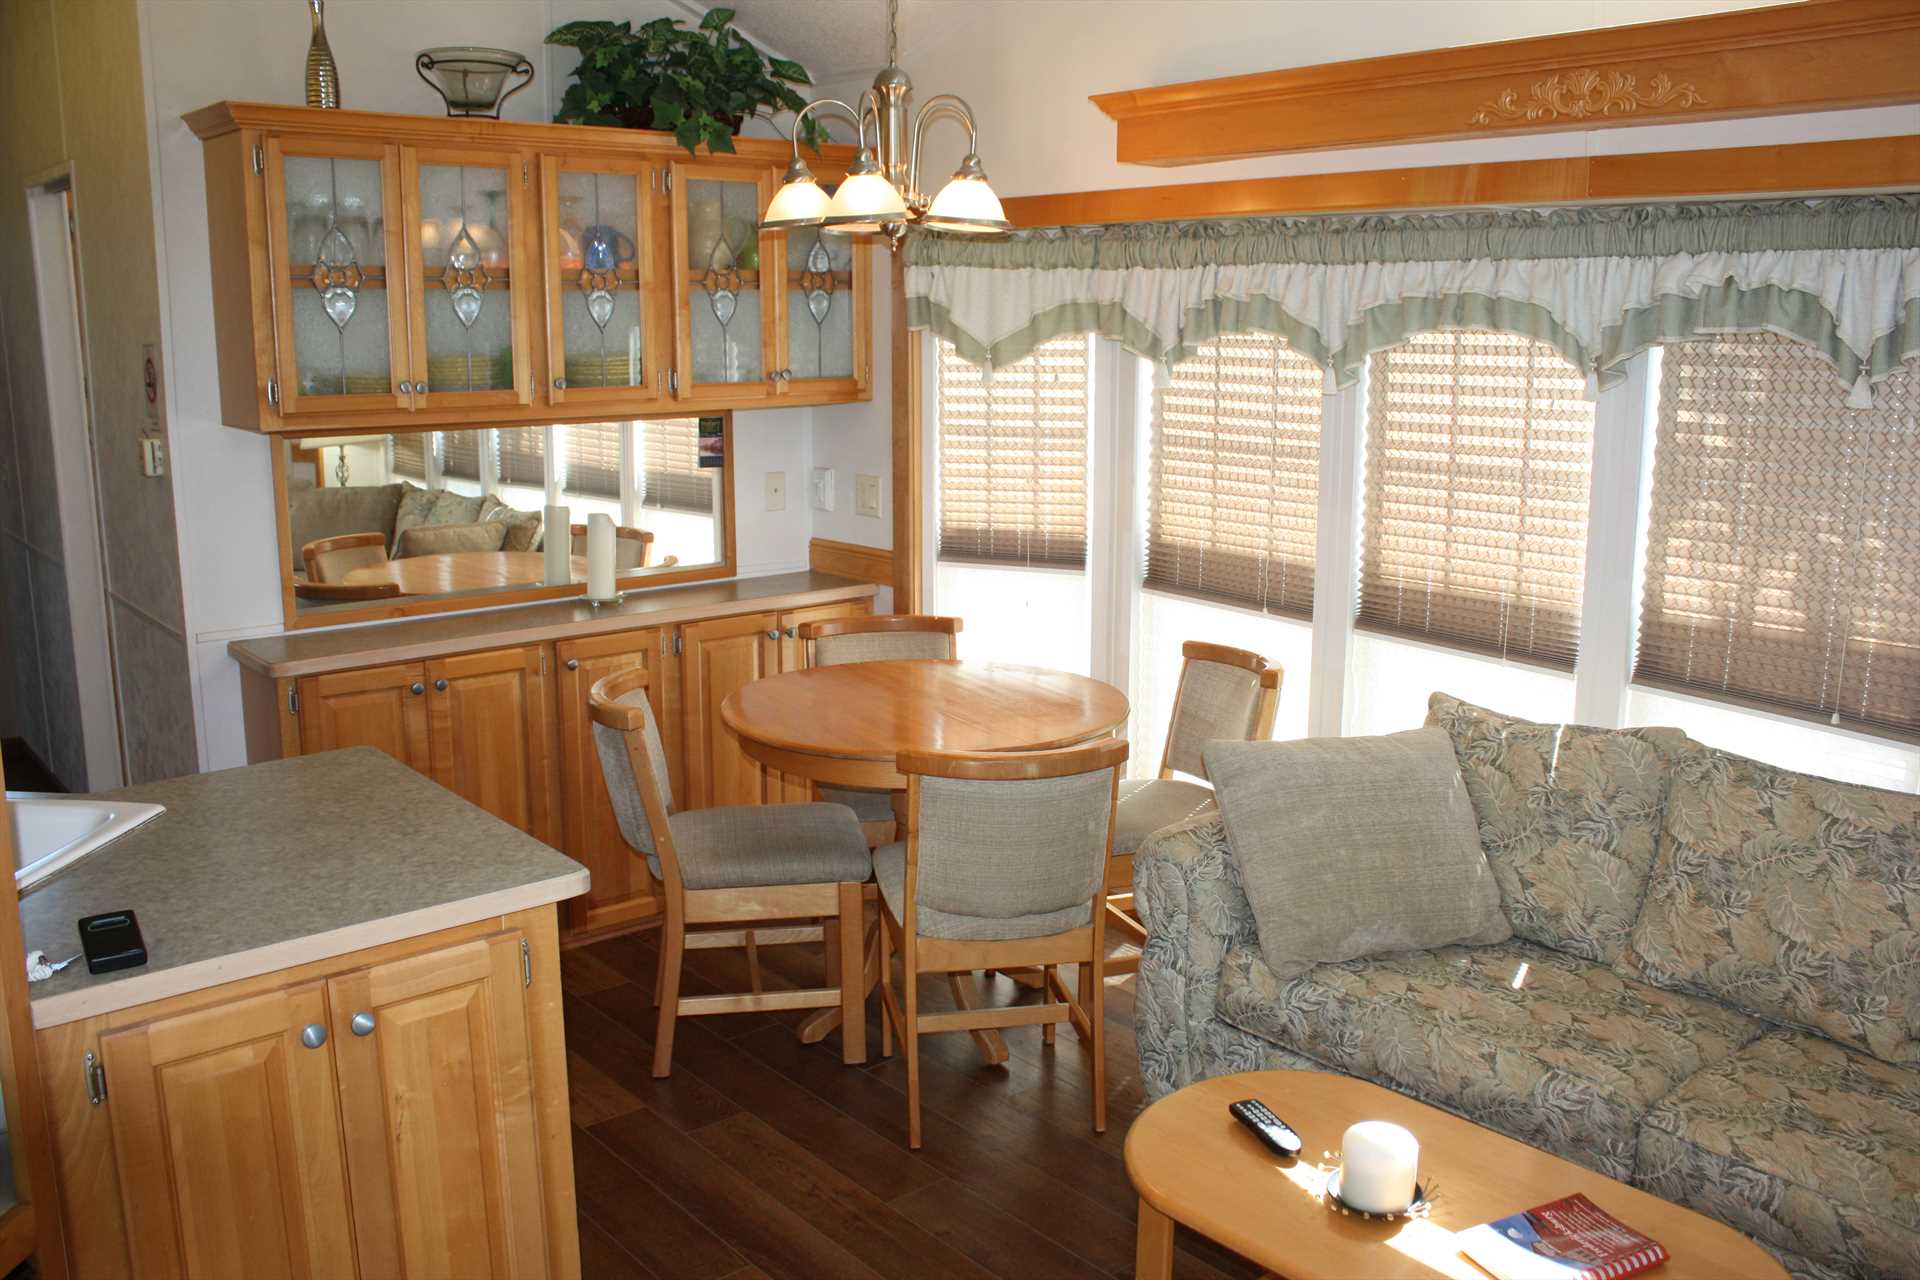                                                 Homey country charm fills the entire cabin. What a delightful place to enjoy a country breakfast!